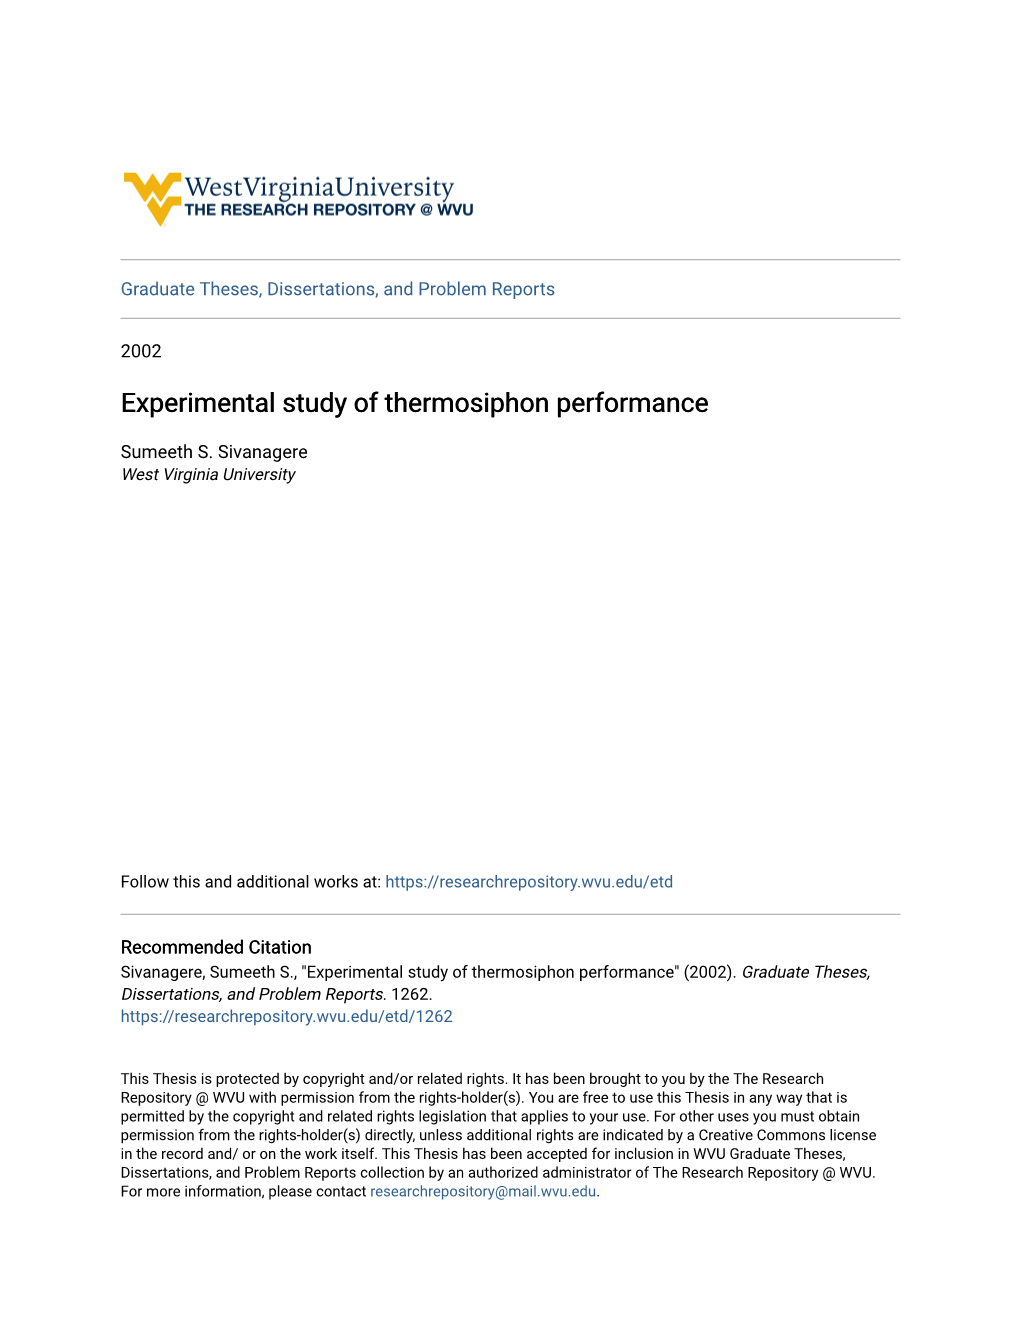 Experimental Study of Thermosiphon Performance